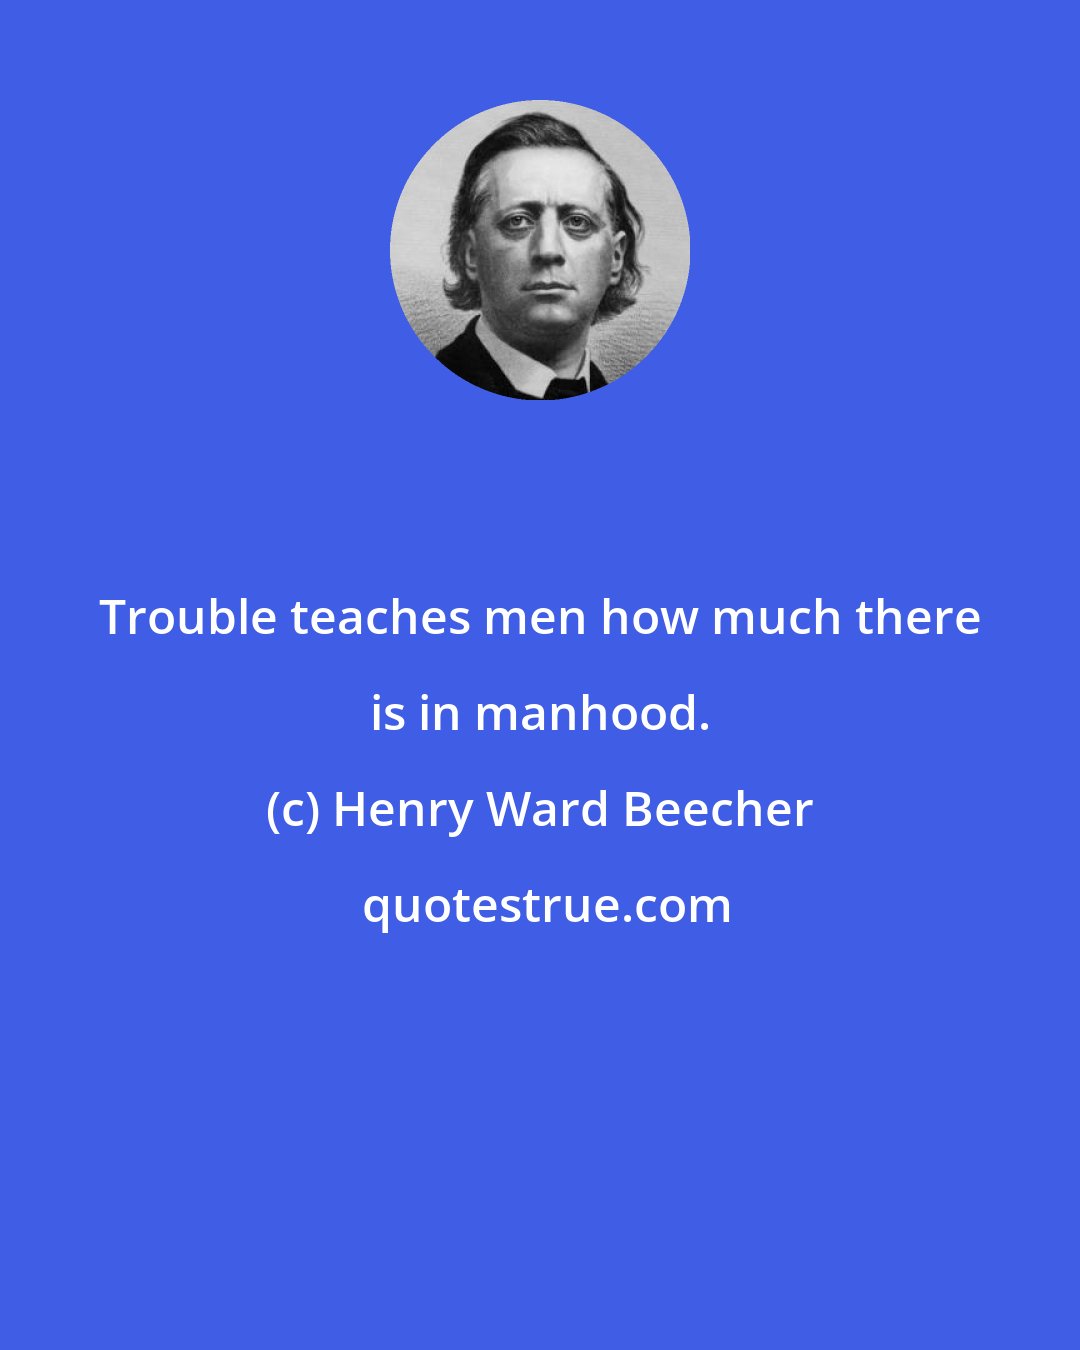 Henry Ward Beecher: Trouble teaches men how much there is in manhood.